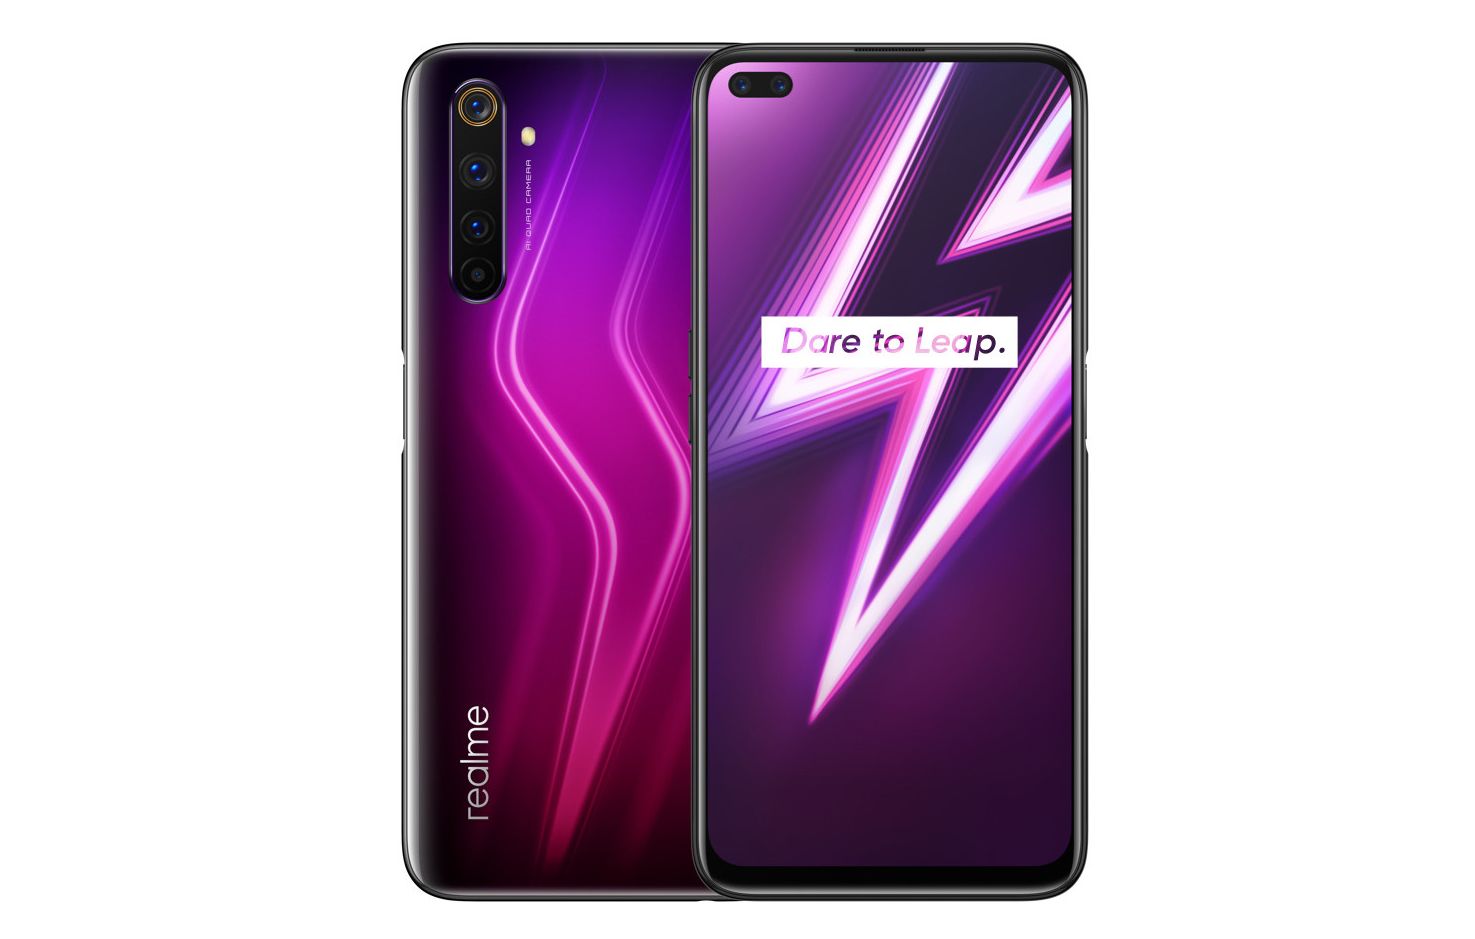  Realme  6  Pro  Lightning Red edition debuts in India 